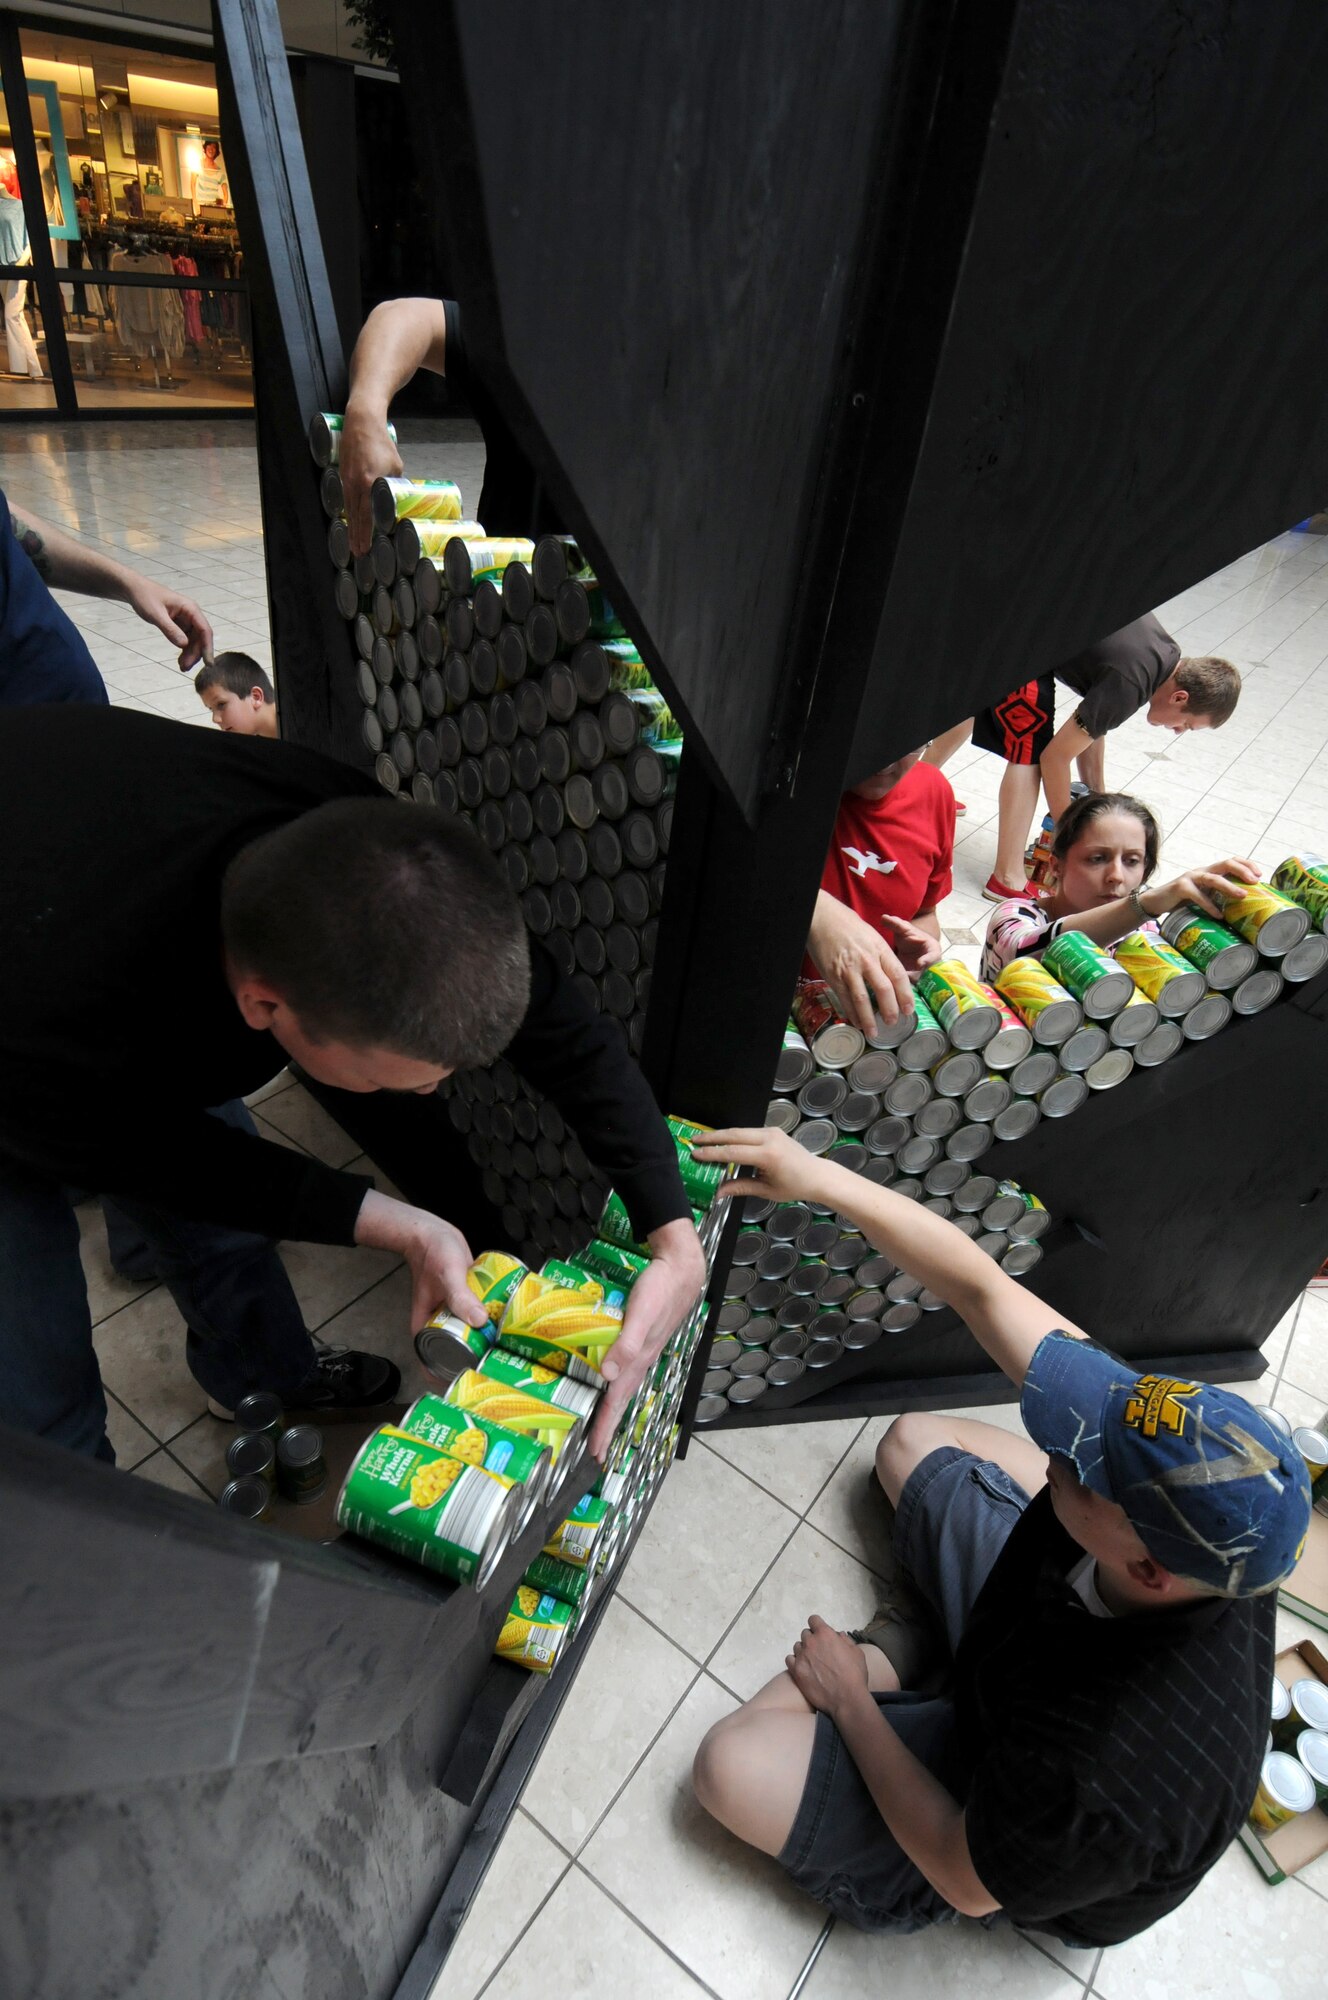 Servicemembers from the 110th Airlift Wing, Battle Creek Air National Guard Base and their families participate in the local food drive Canned Sculpture Exhibit held at Lakeview Square Mall, Battle Creek, Mich., on Sunday, April 22, 2012. A donation of over $600 was collected toward the sculpture equaling over a 1,000 cans. All food collected is donated to the Food Bank of South Central Michigan. Sculptures will be on display until Sunday, May 6, 2012. (U.S. Air National Guard Photo by Master Sgt. Sonia Pawloski/Released)